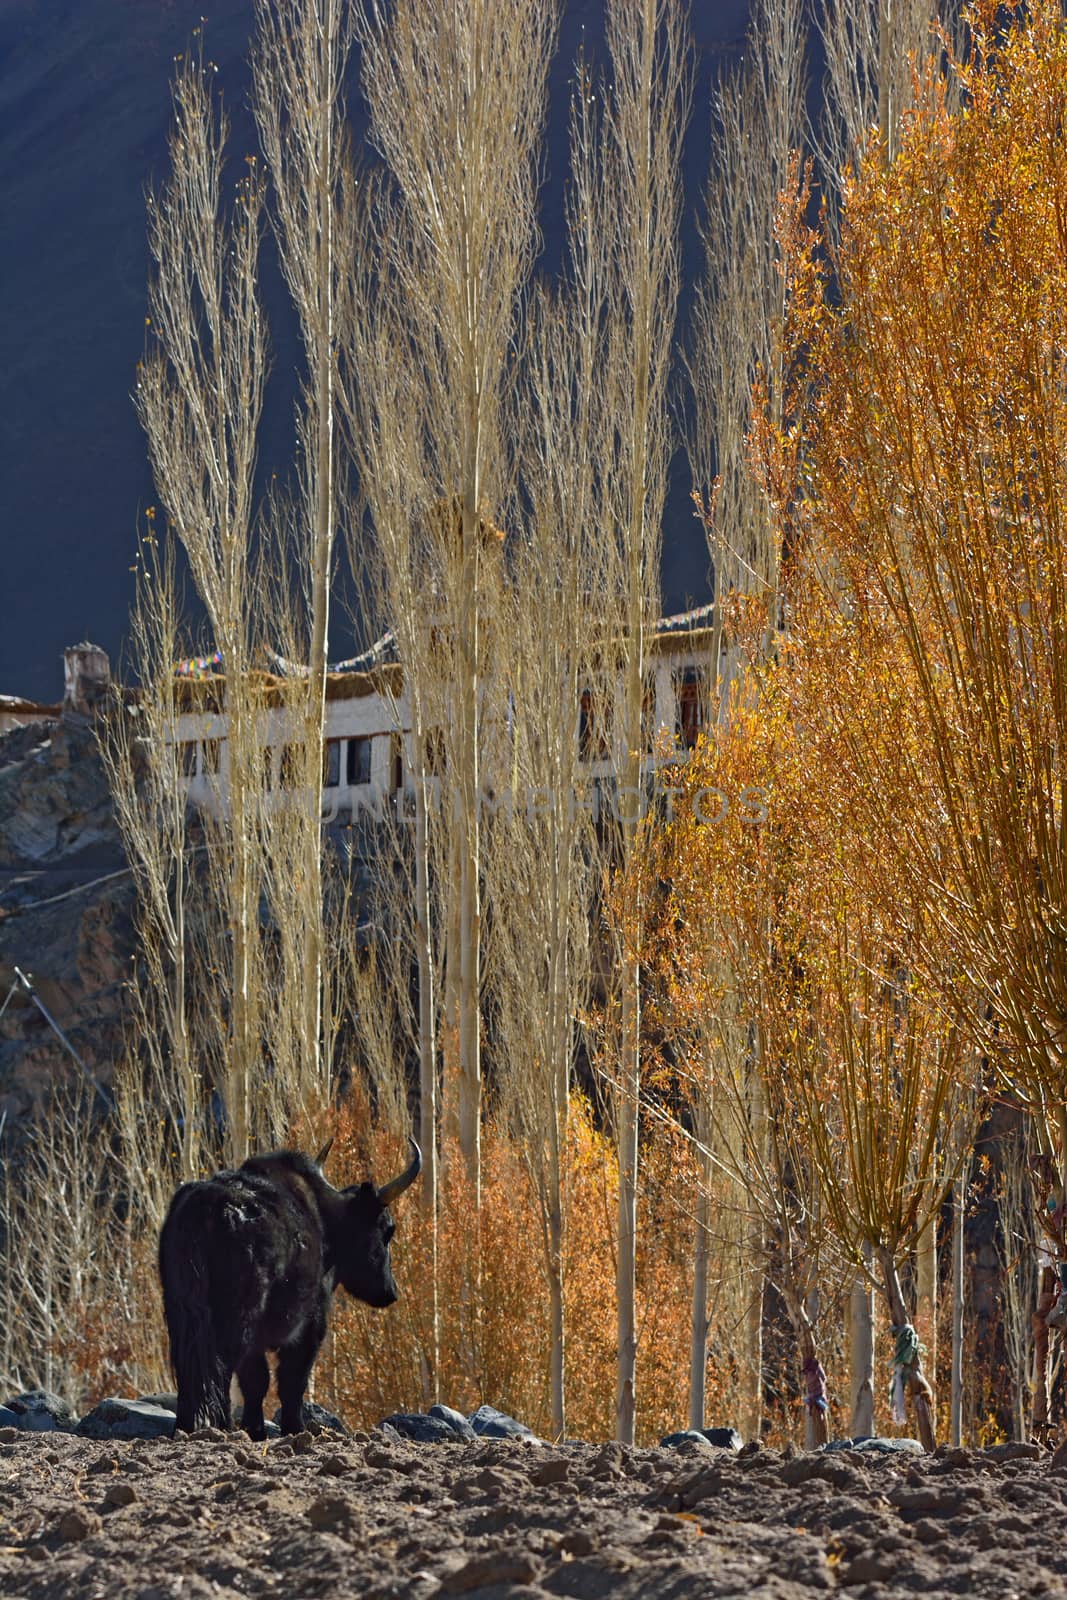 Yak in the valley of Ladakh, India by think4photop